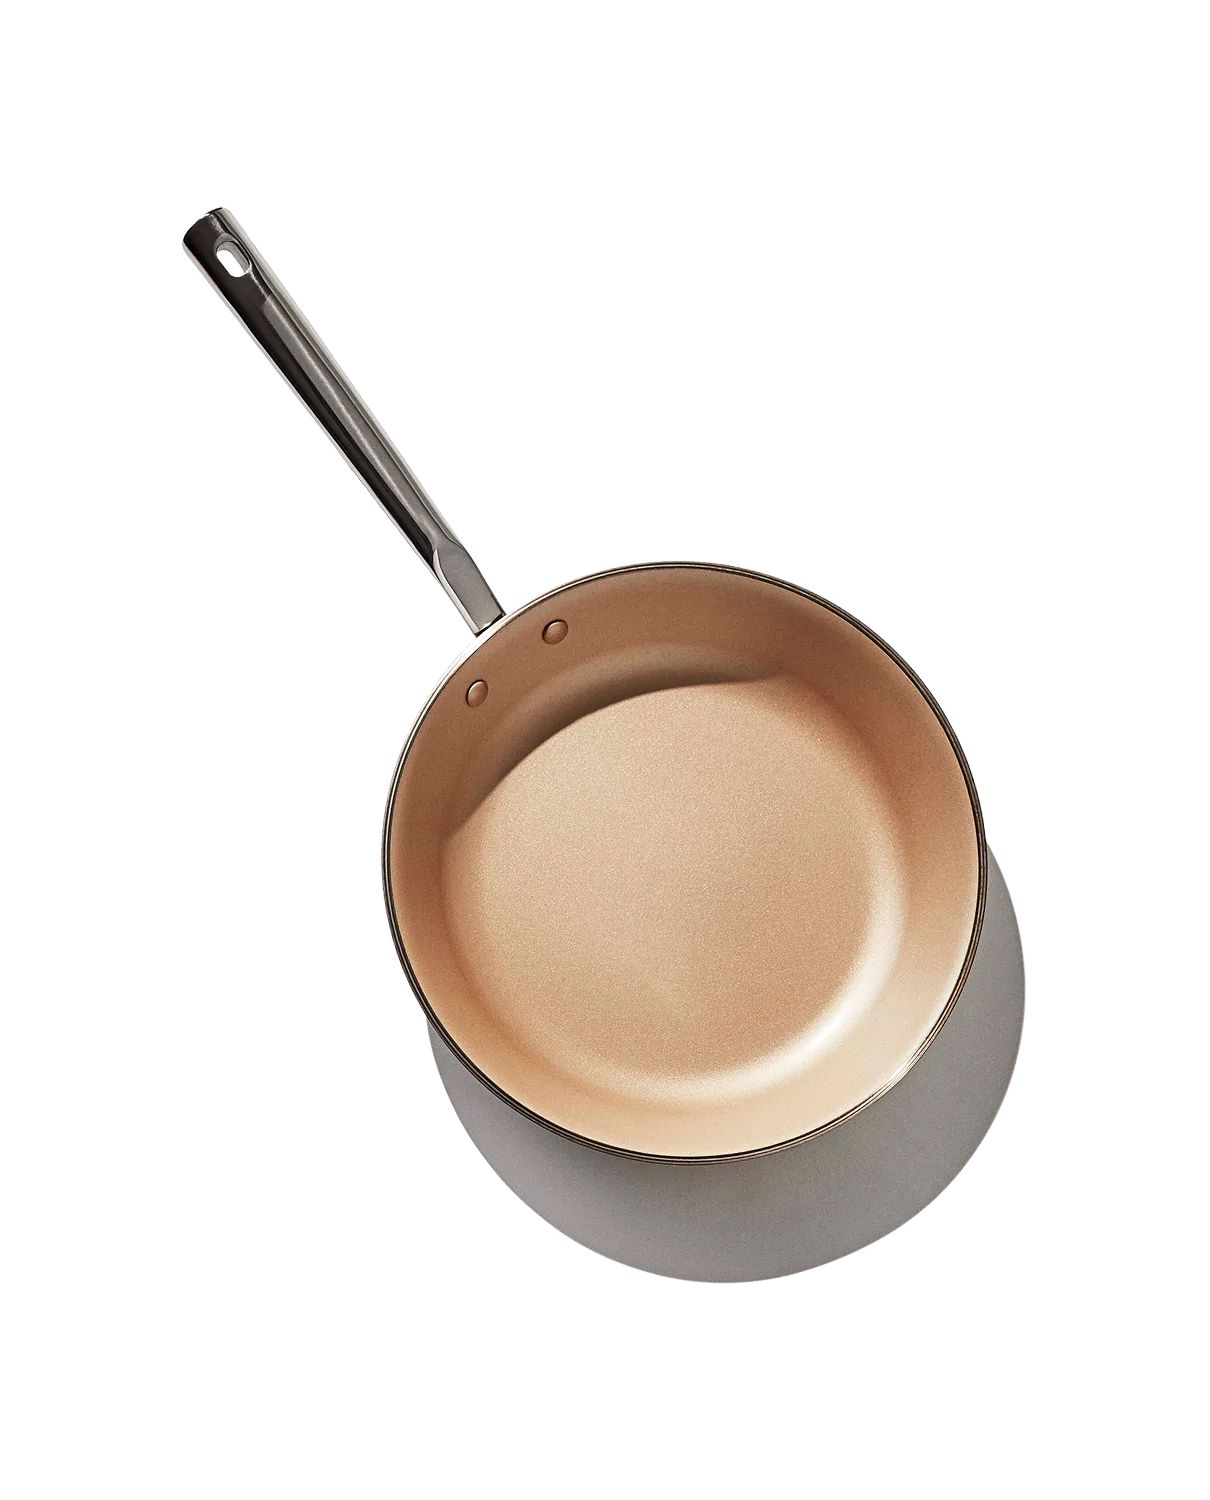 The Coated Pan | Material